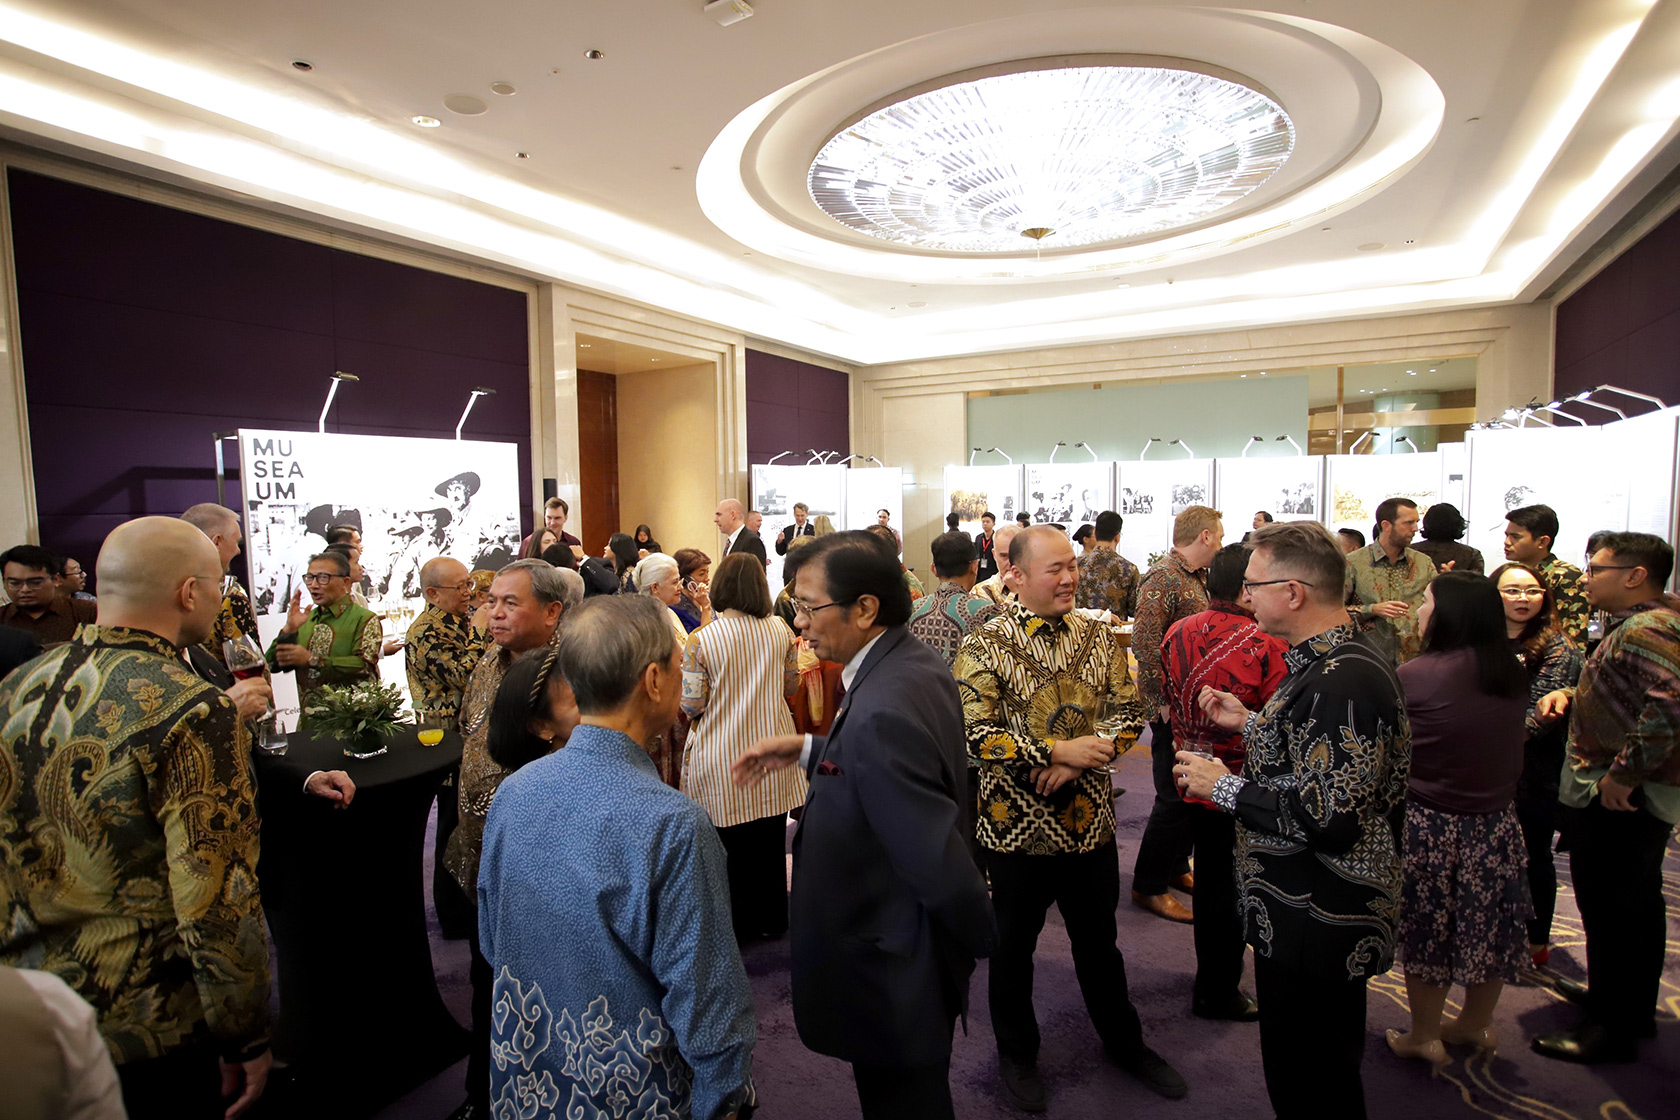 Distinguished guests engage in joyful conversations while enjoying canapés and drinks.